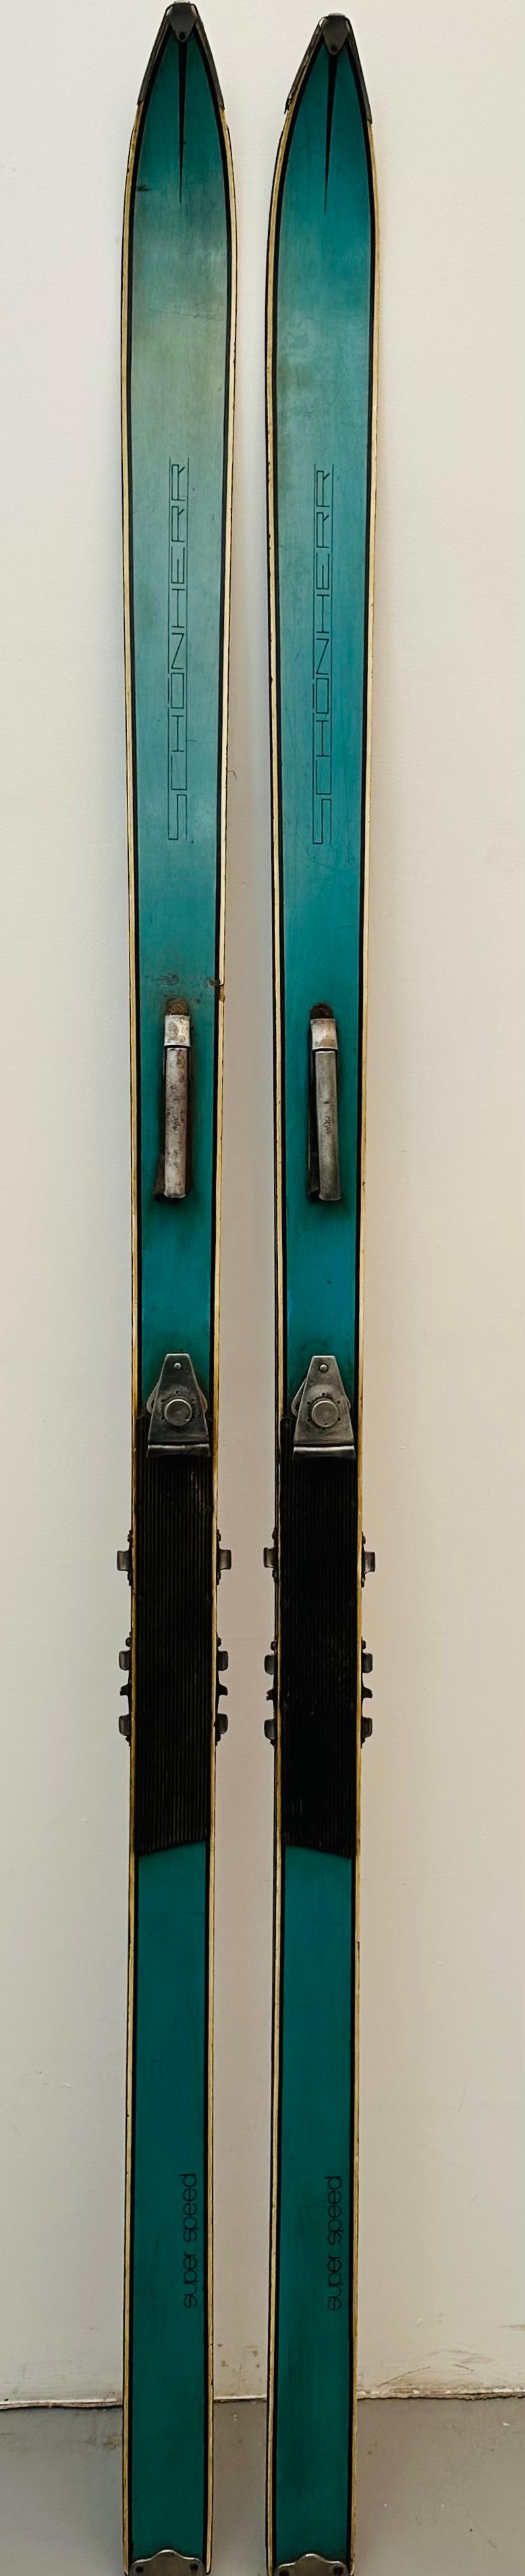 Pair of vintage German Schonherr Superspeed wooden skis with bindings.  In good vintage used condition considering their age which I believe to be around 1950s/60s.  Please refer to the images for their condition.

For decoration purposes only in